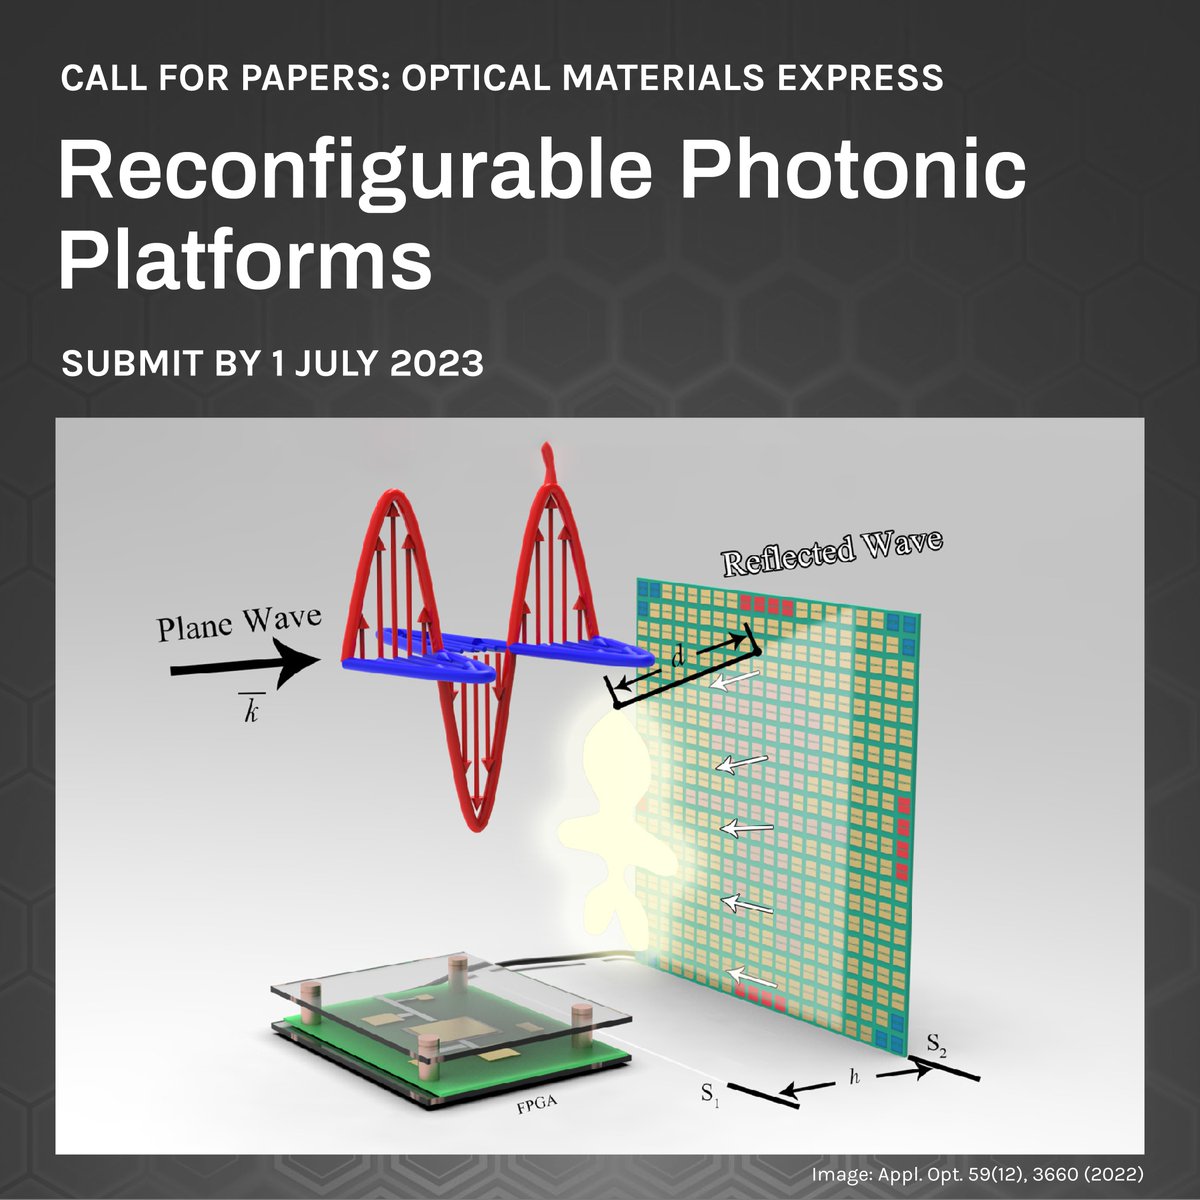 This #OPG_OMEx Feature Issue will highlight recent advances and future perspectives on traditional and emerging reconfigurable photonic platforms from a materials, device, and circuit level perspective.

Submit your paper by 1 July: ow.ly/39sy50Ow4Mb